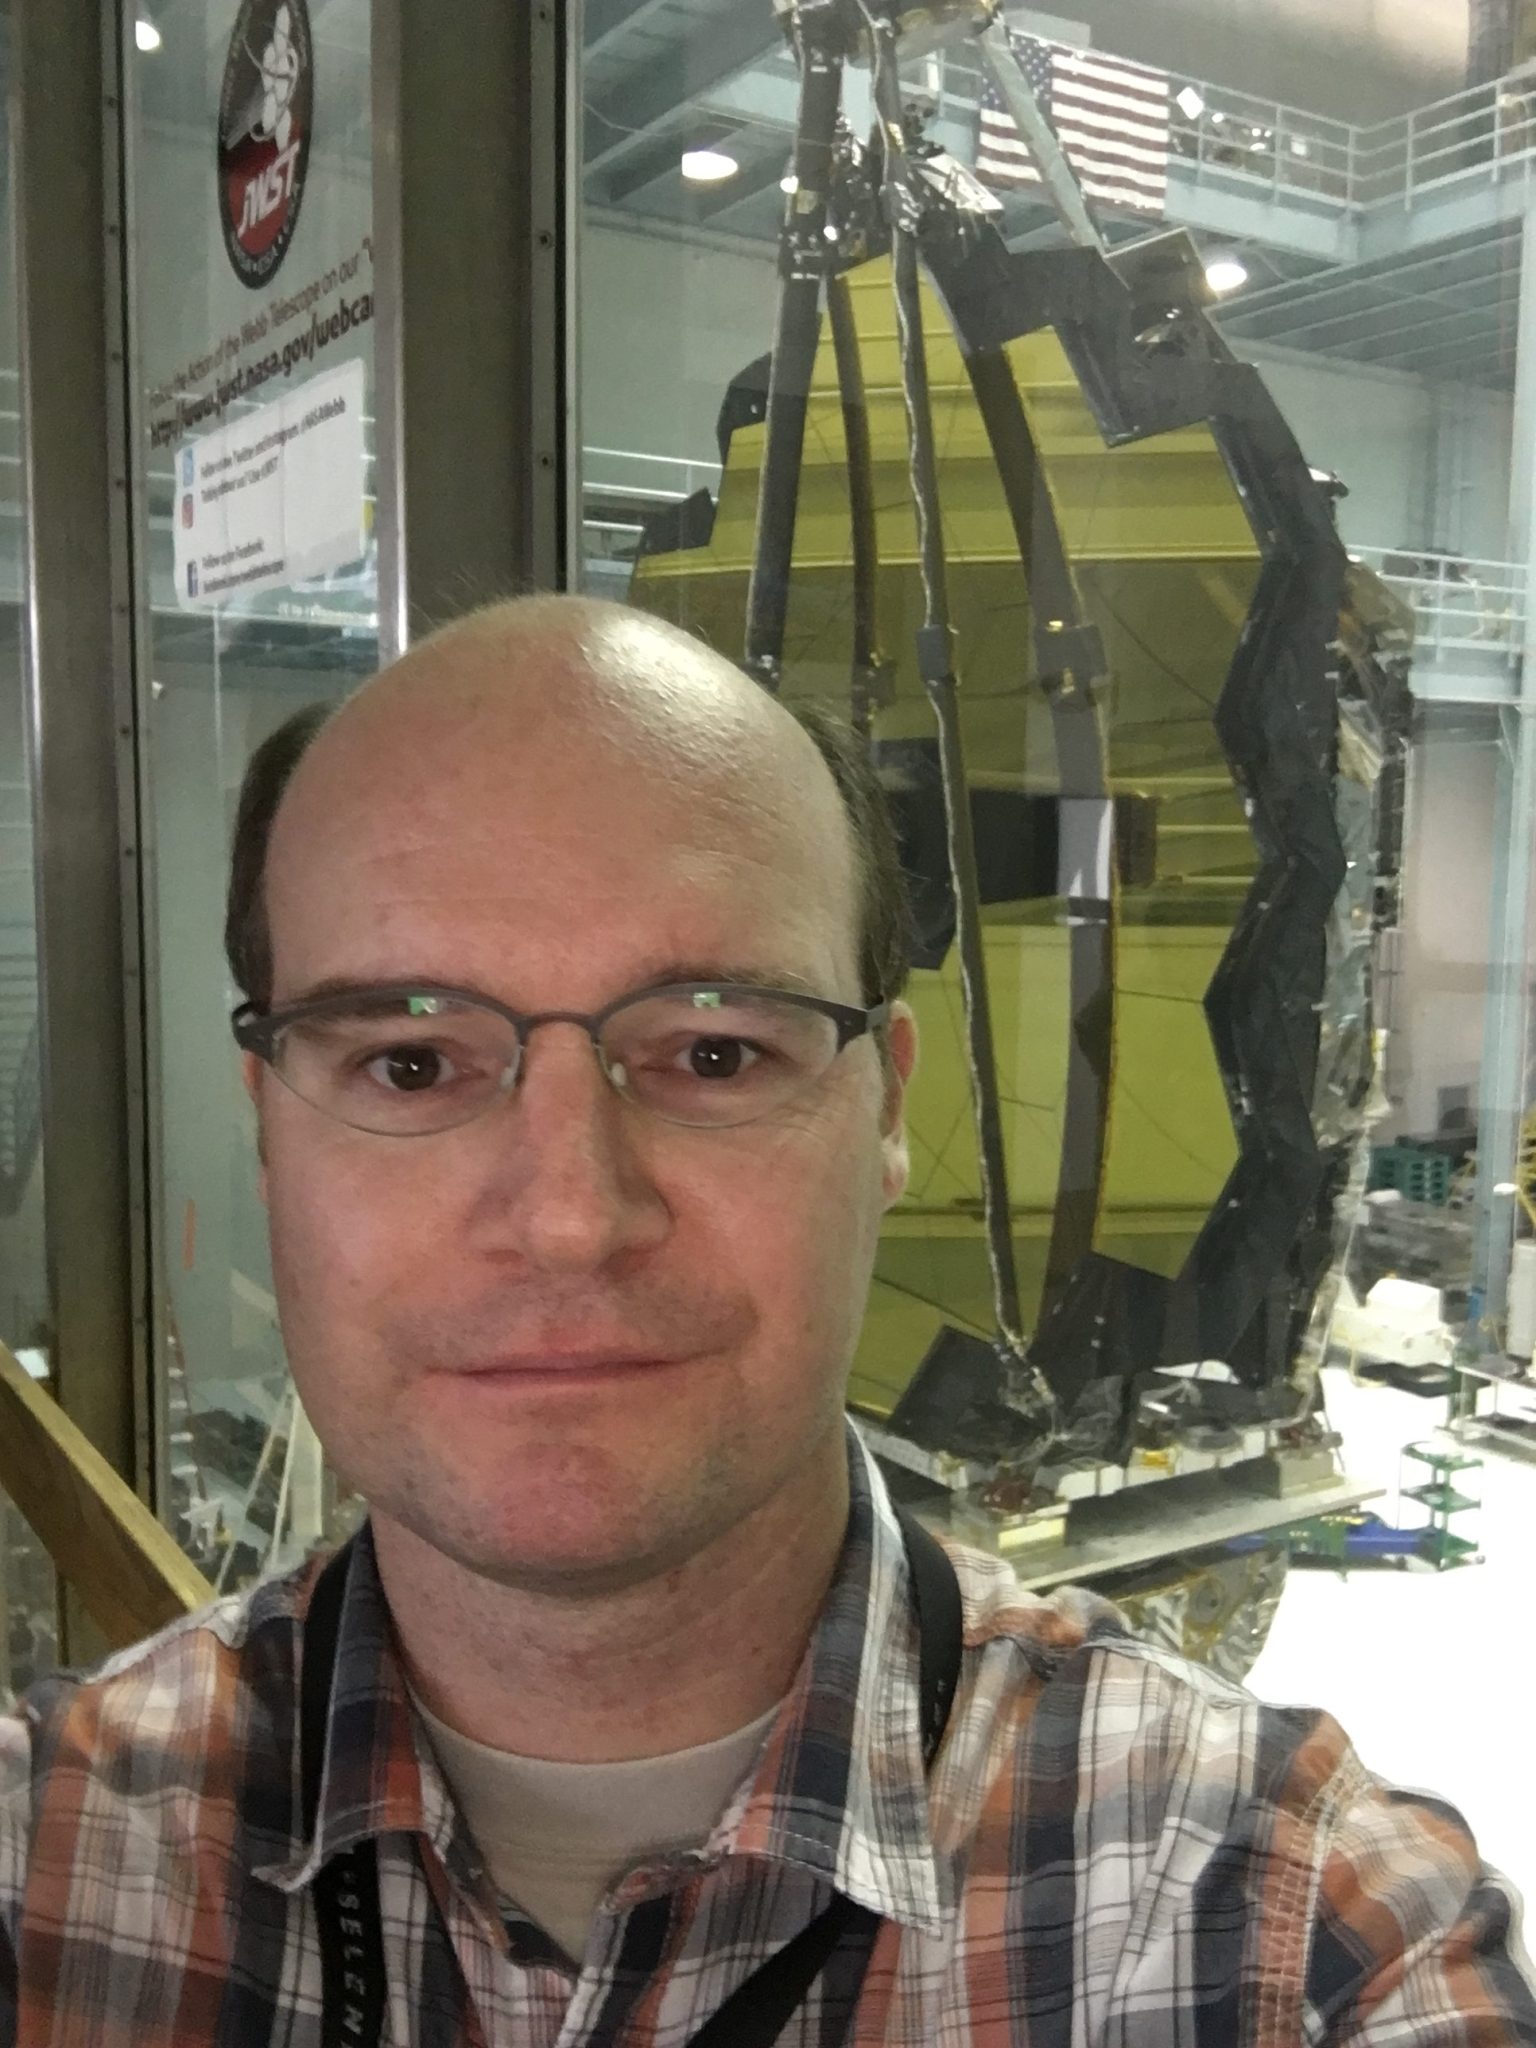 A man smiles slightly in a selfie in front of the James Webb Space Telescope's distinctive gold hexagonal mirror. He has dark hair above his hears and wears glasses an an orange, black, and white plaid shirt.